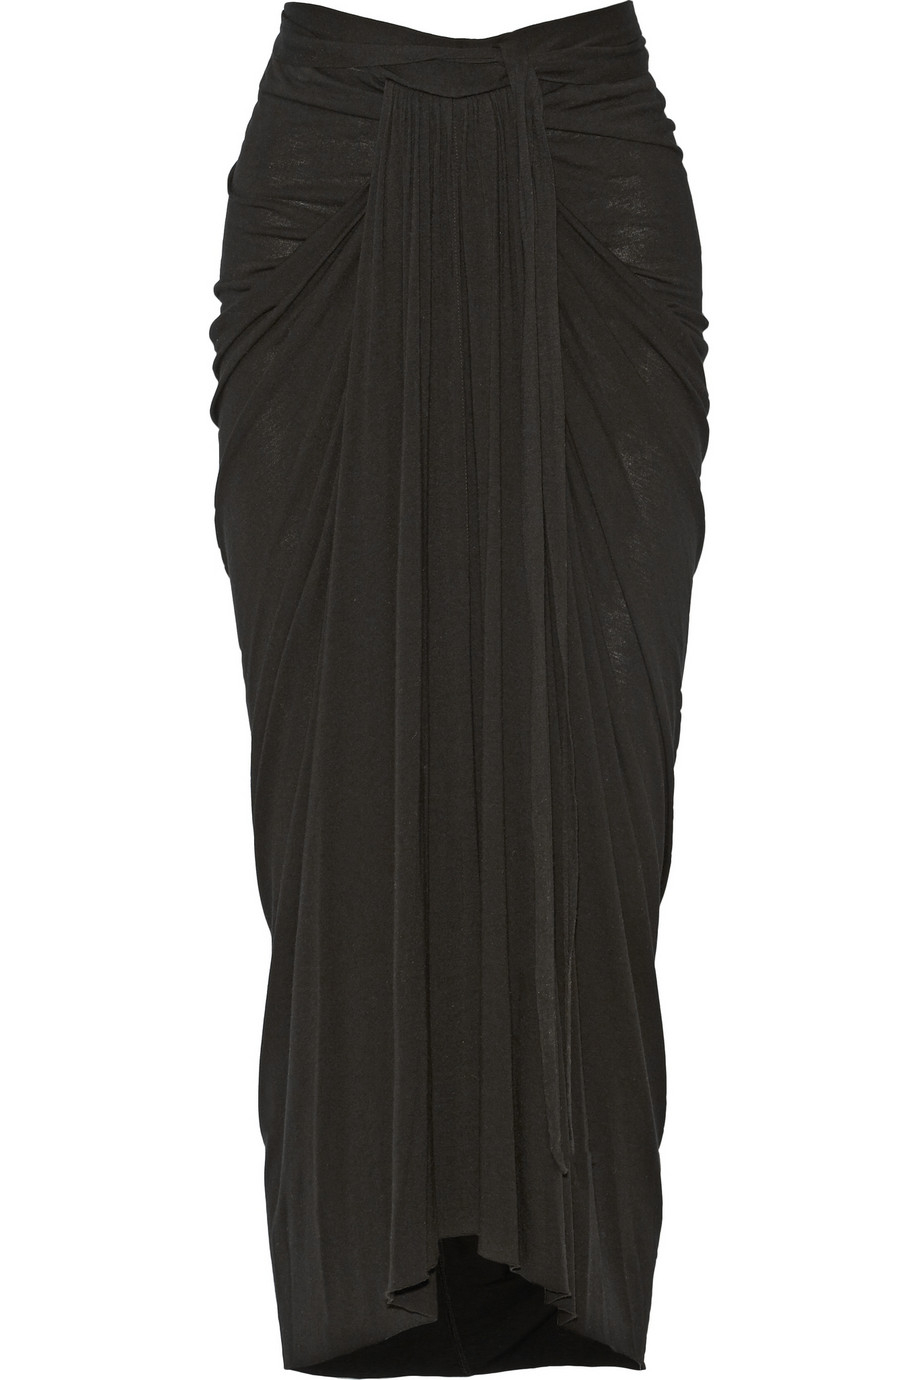 Rick owens Lilies Draped Stretch-Jersey Maxi Skirt in Black | Lyst